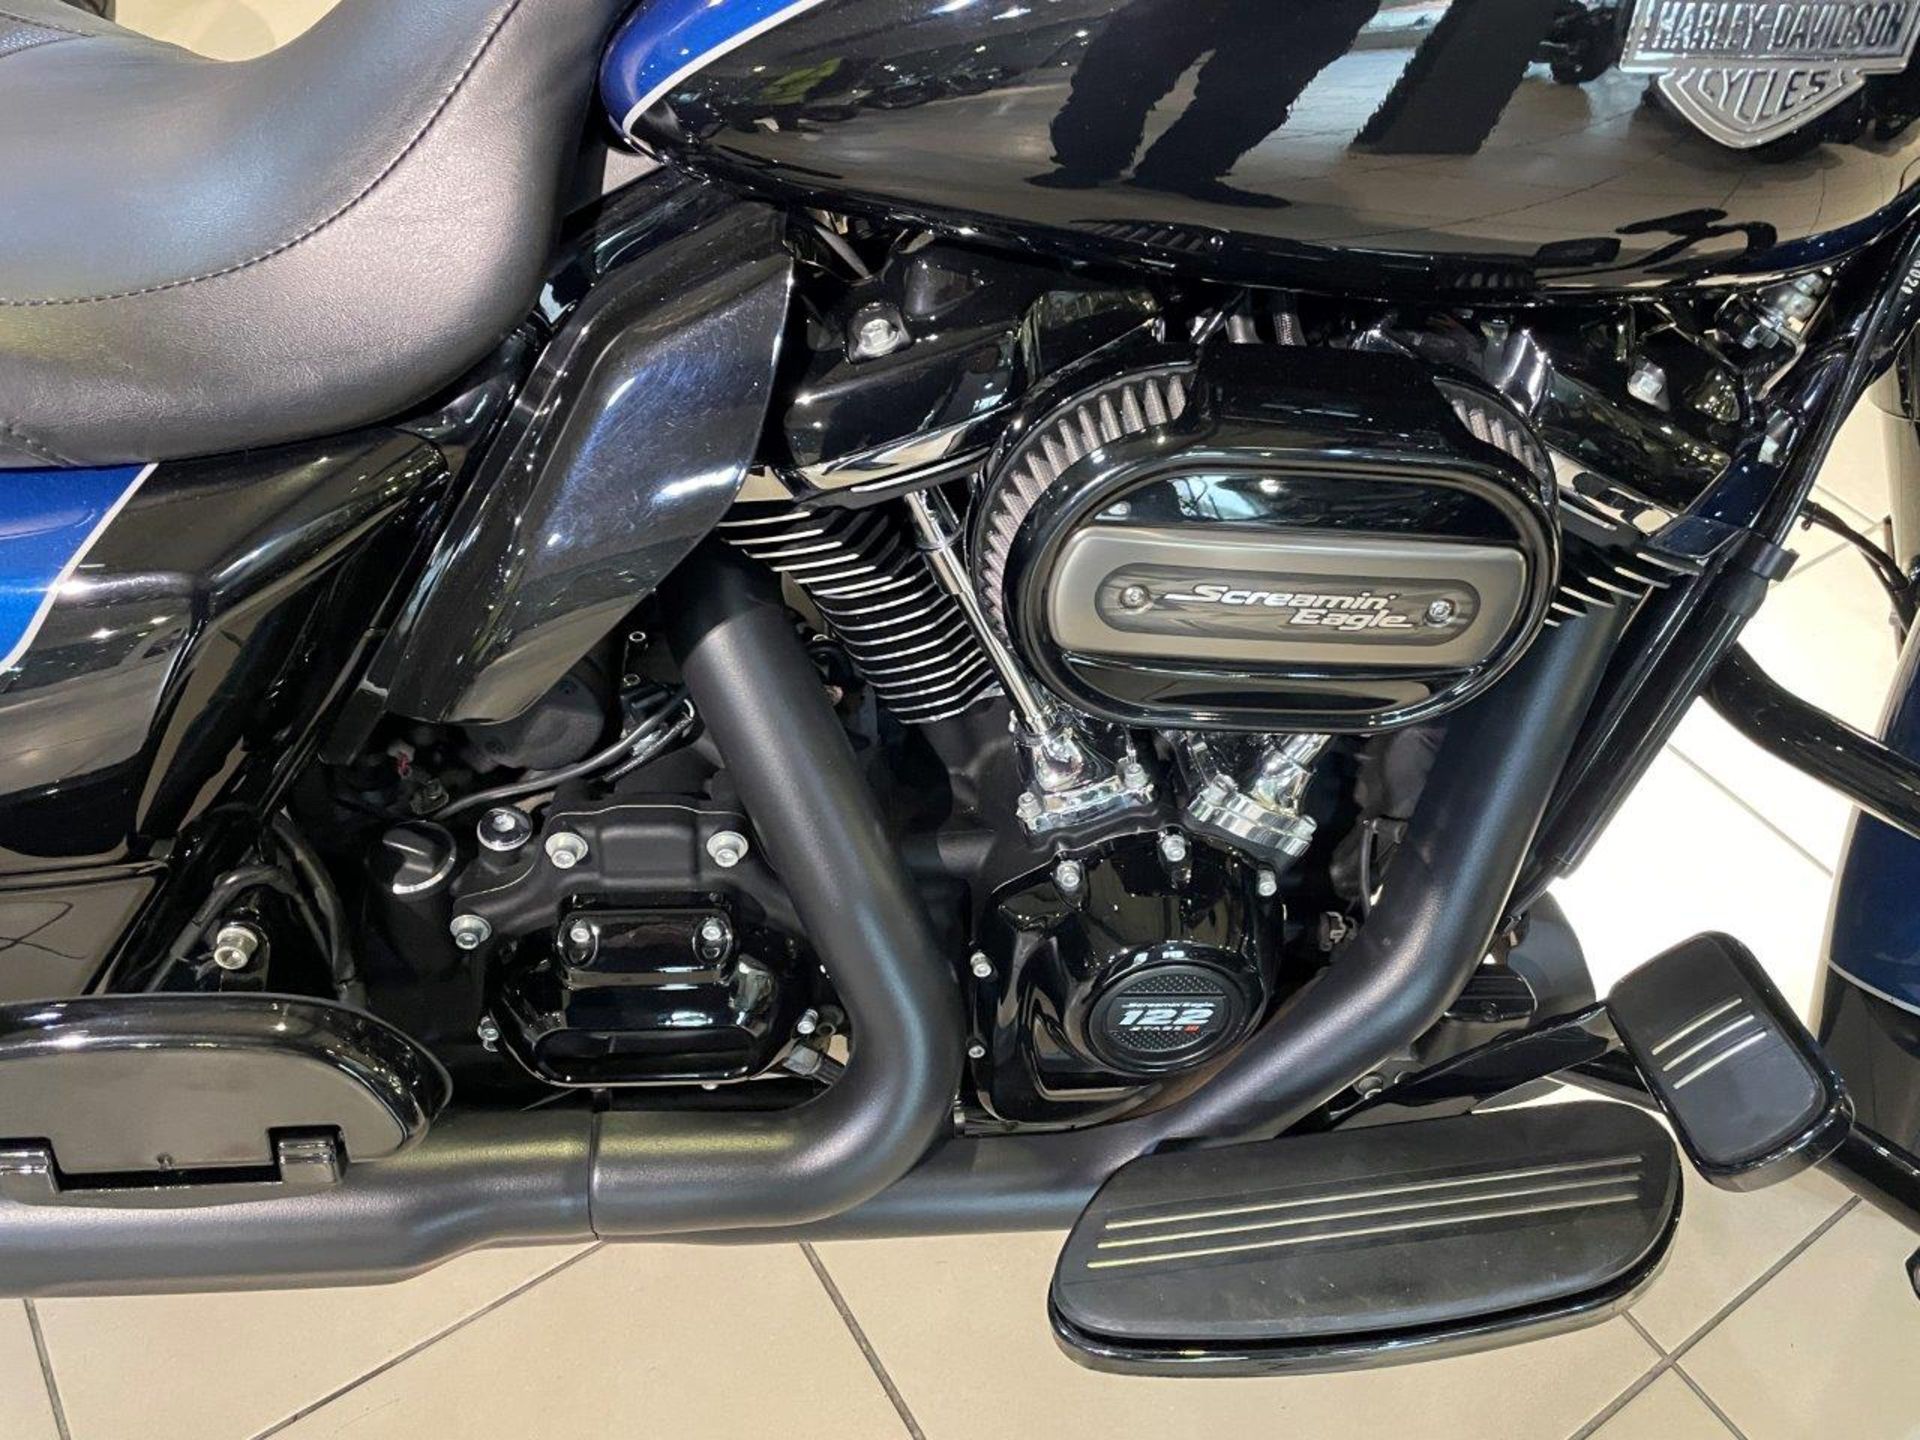 Harley Davidson FLTRXS Road Glide Special, with stage 3 upgrade Motorbike (May 2022) - Image 11 of 20